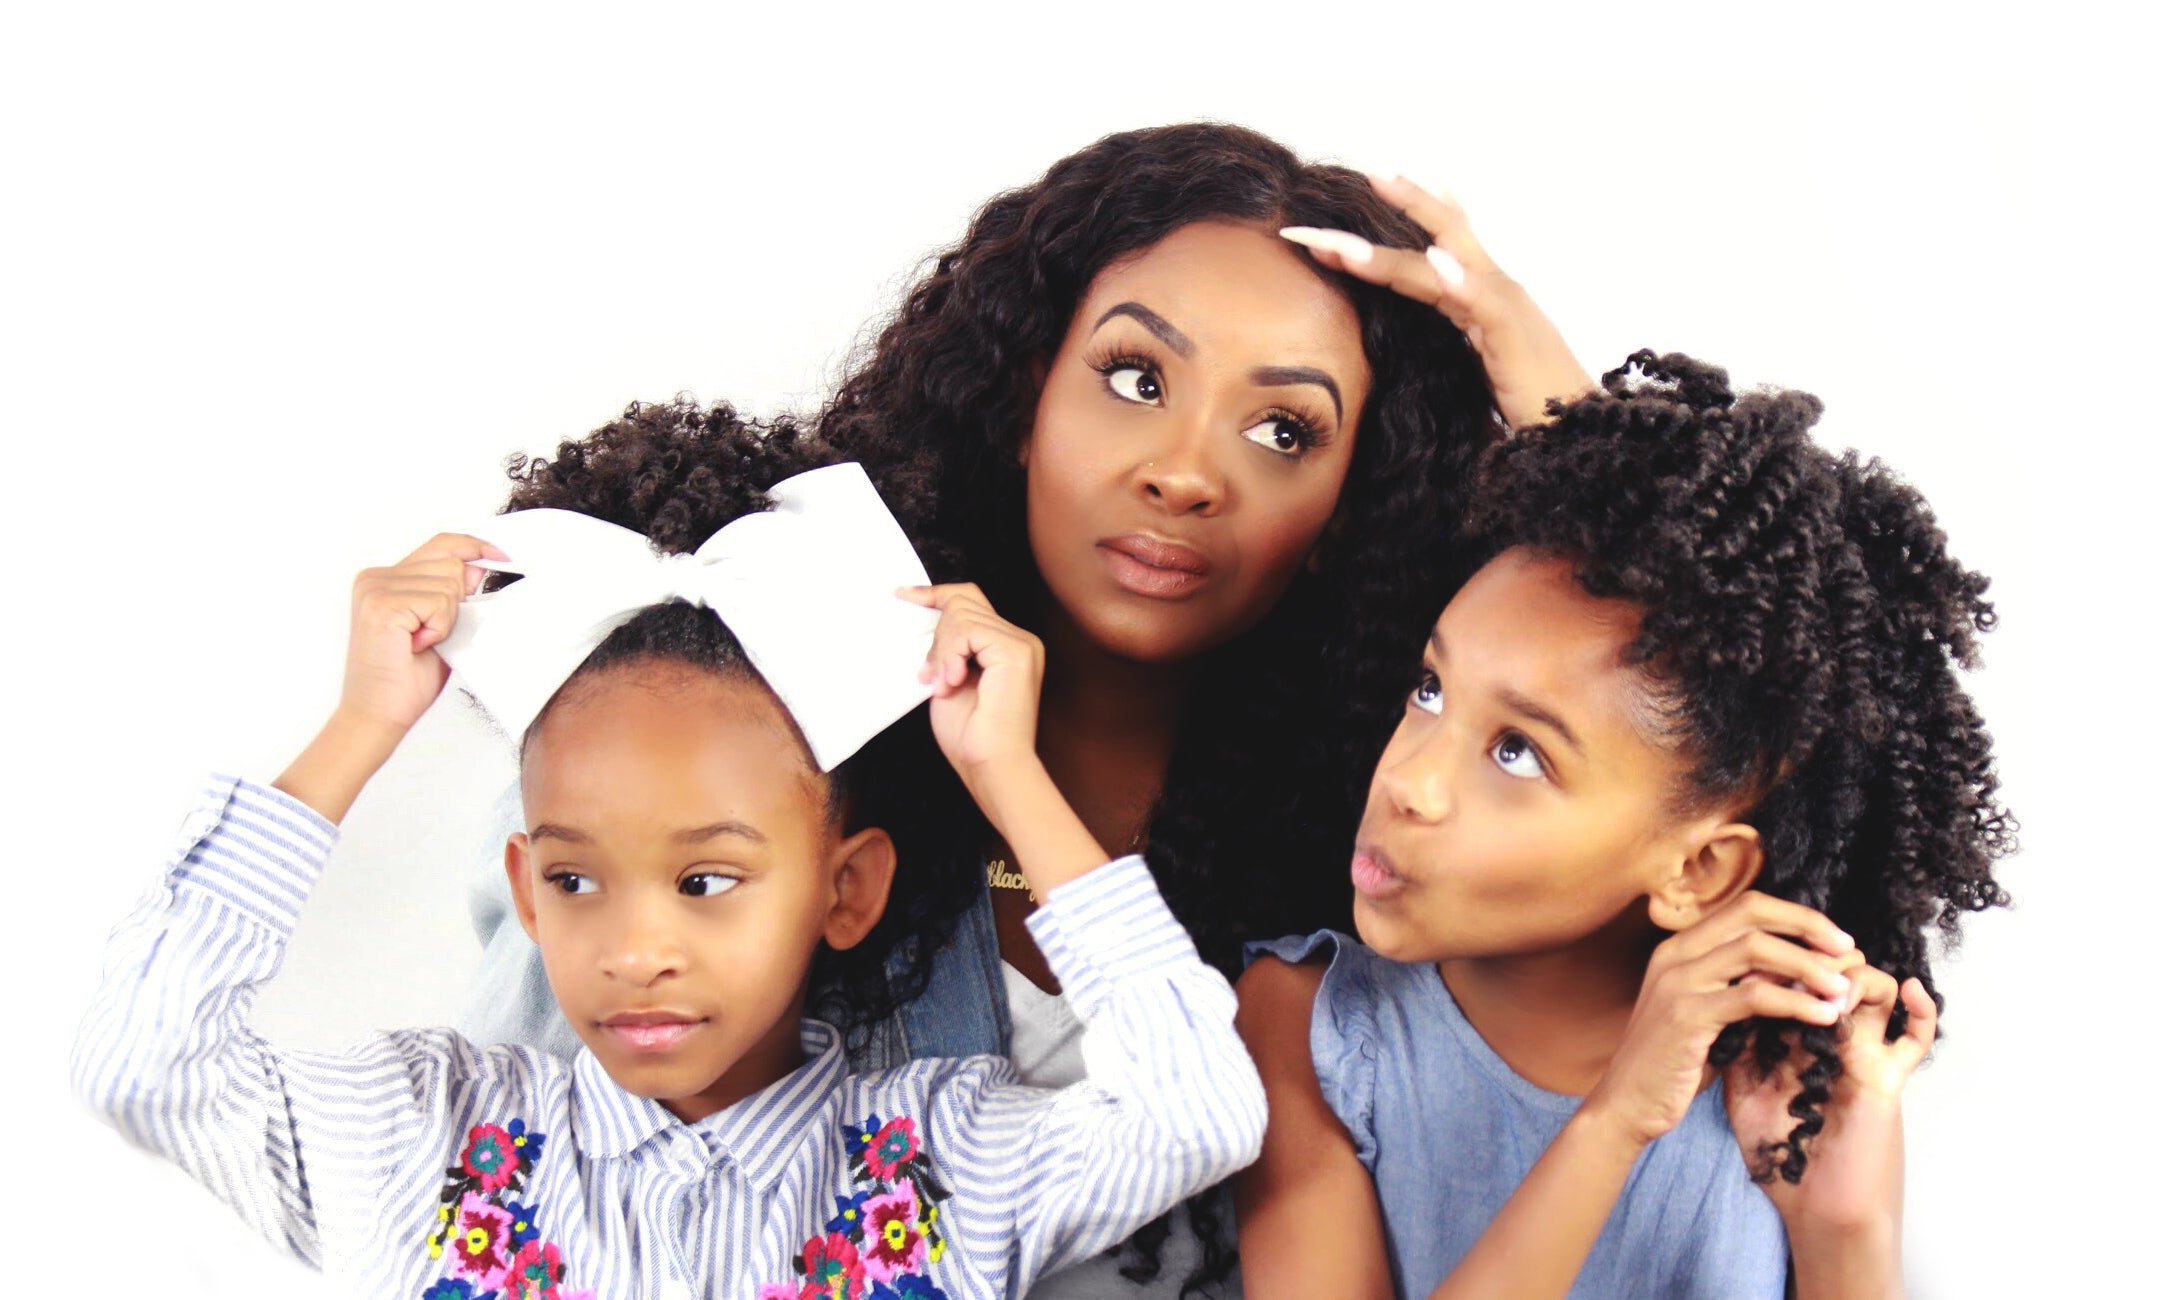 Passing the "Naturalista Torch" onto My Daughters